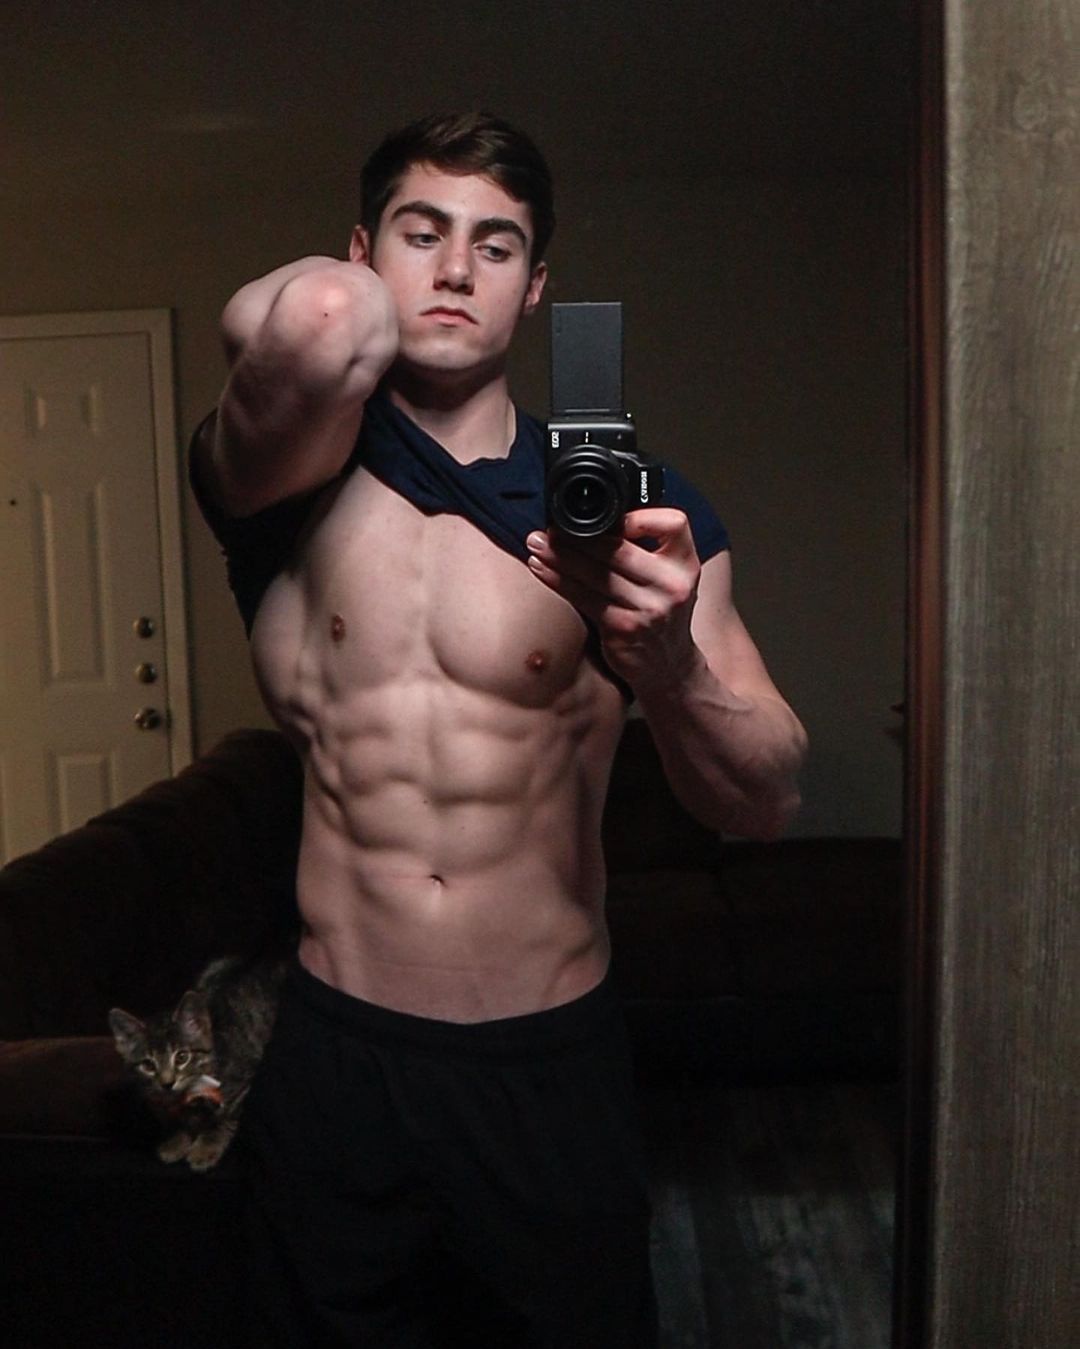 cocky-young-hot-guy-abs-selfie-cat-sean-stahl-handsome-fit-college-frat-bro